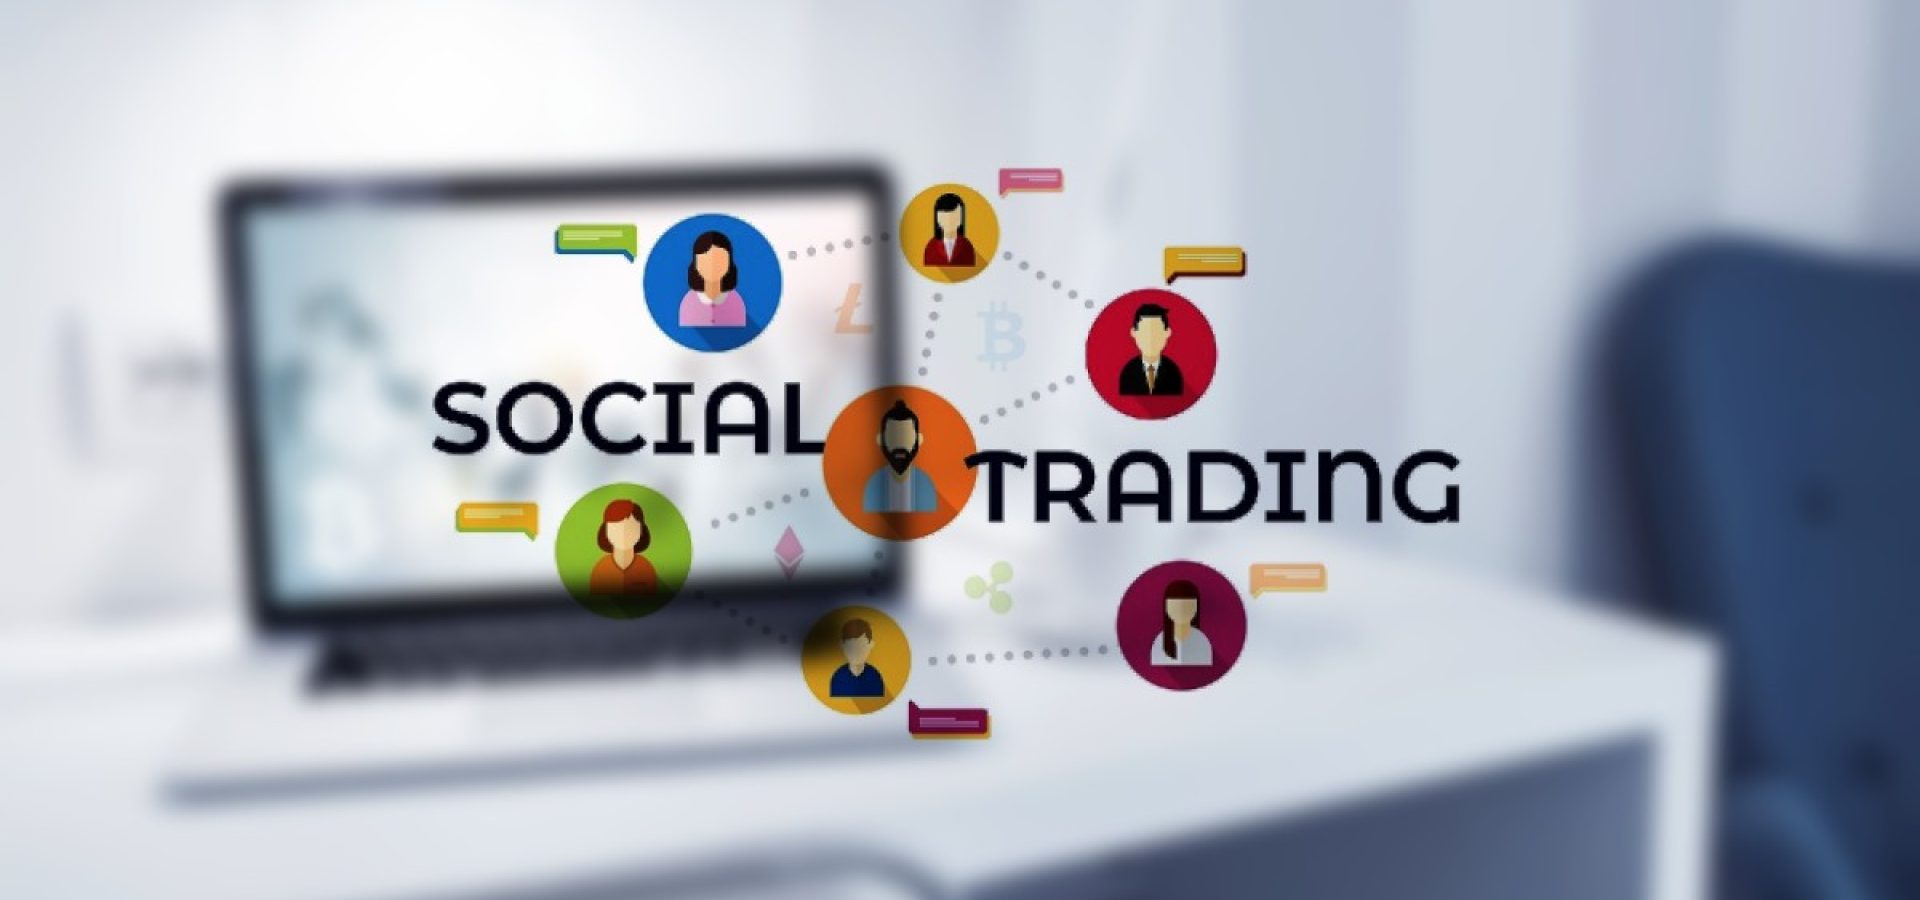 How to do social trading - brief guide